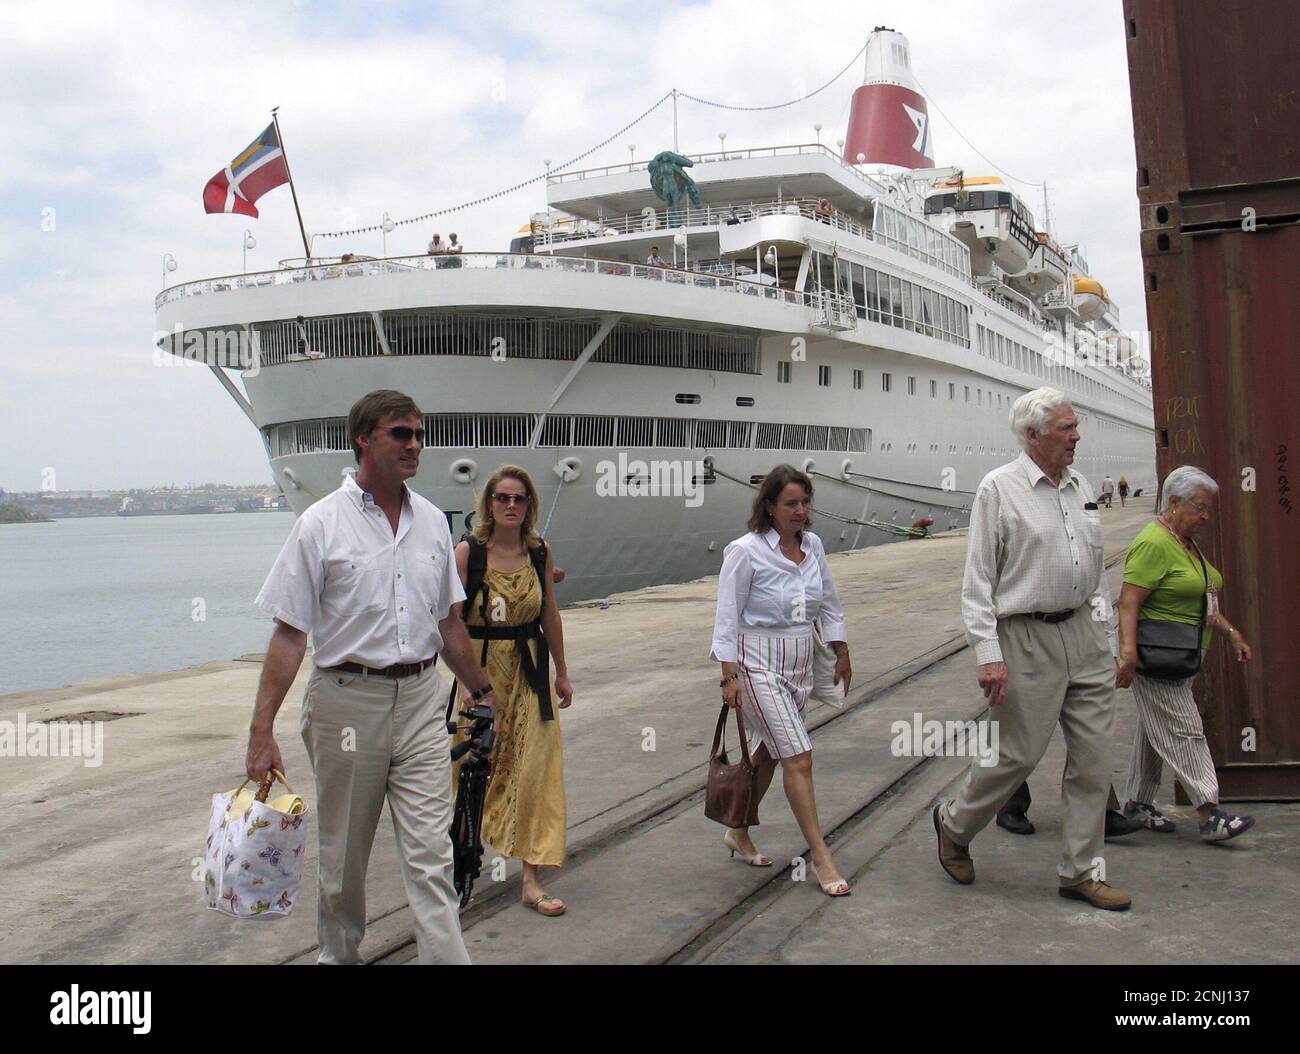 Tourists from the Norwegian cruise ship 'Black Watch Nassau' disembark at the Kenyan coastal sea port of Mombasa after the ship docked at the port in this February 8, 2007 file photo. Black Watch Nassau is on a stopover for three days in Mombasa, started its voyage at the Southampton in Britain with 807 passengers and 350 crew. East Africa's biggest port of Mombasa will spend 100 million shillings ($980,392.16) to build a new cruise ship terminal aimed at boosting tourism, port management said on Wednesday. REUTERS/Joseph Okanga/File Stock Photo